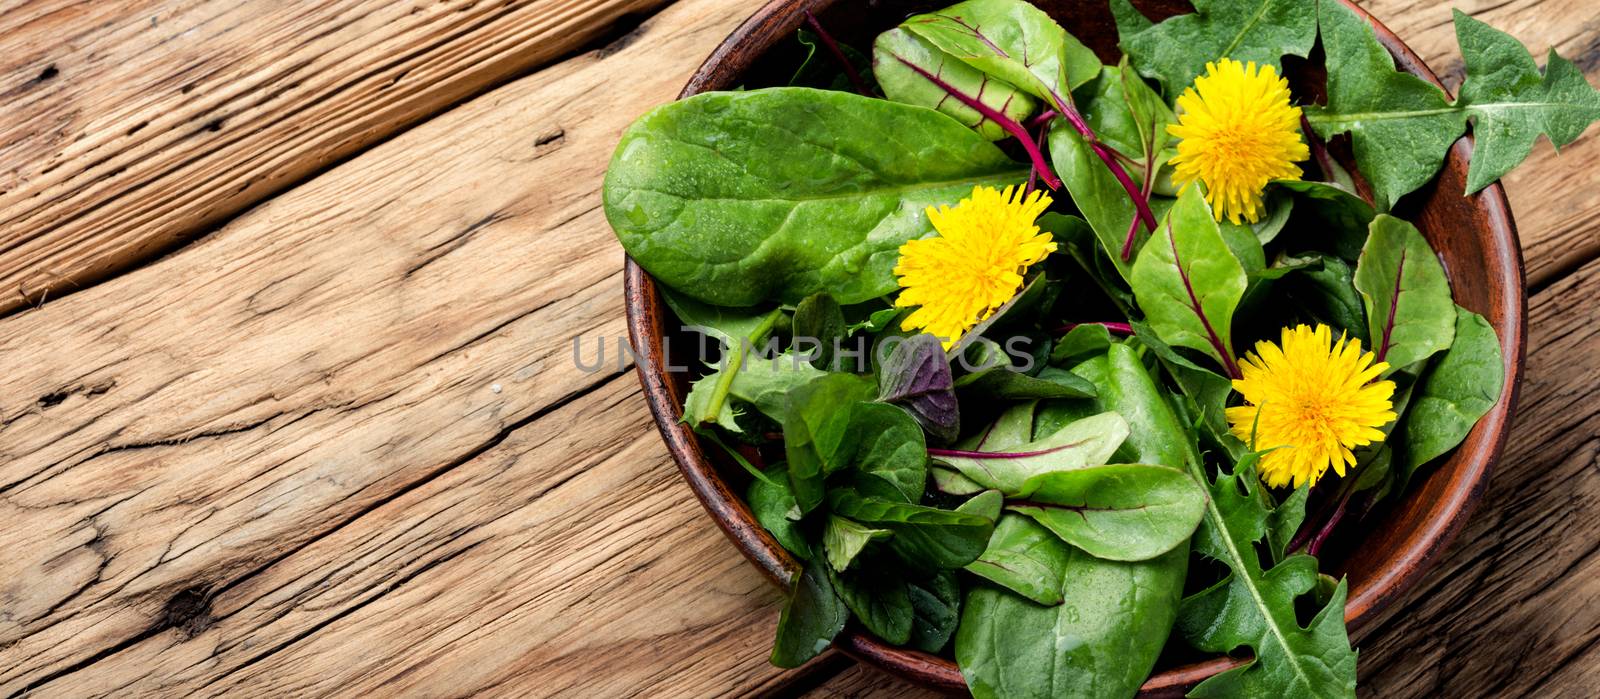 Fresh salad with mixed greens on wooden background.Healthy food.Vegetable salad with fresh lettuce